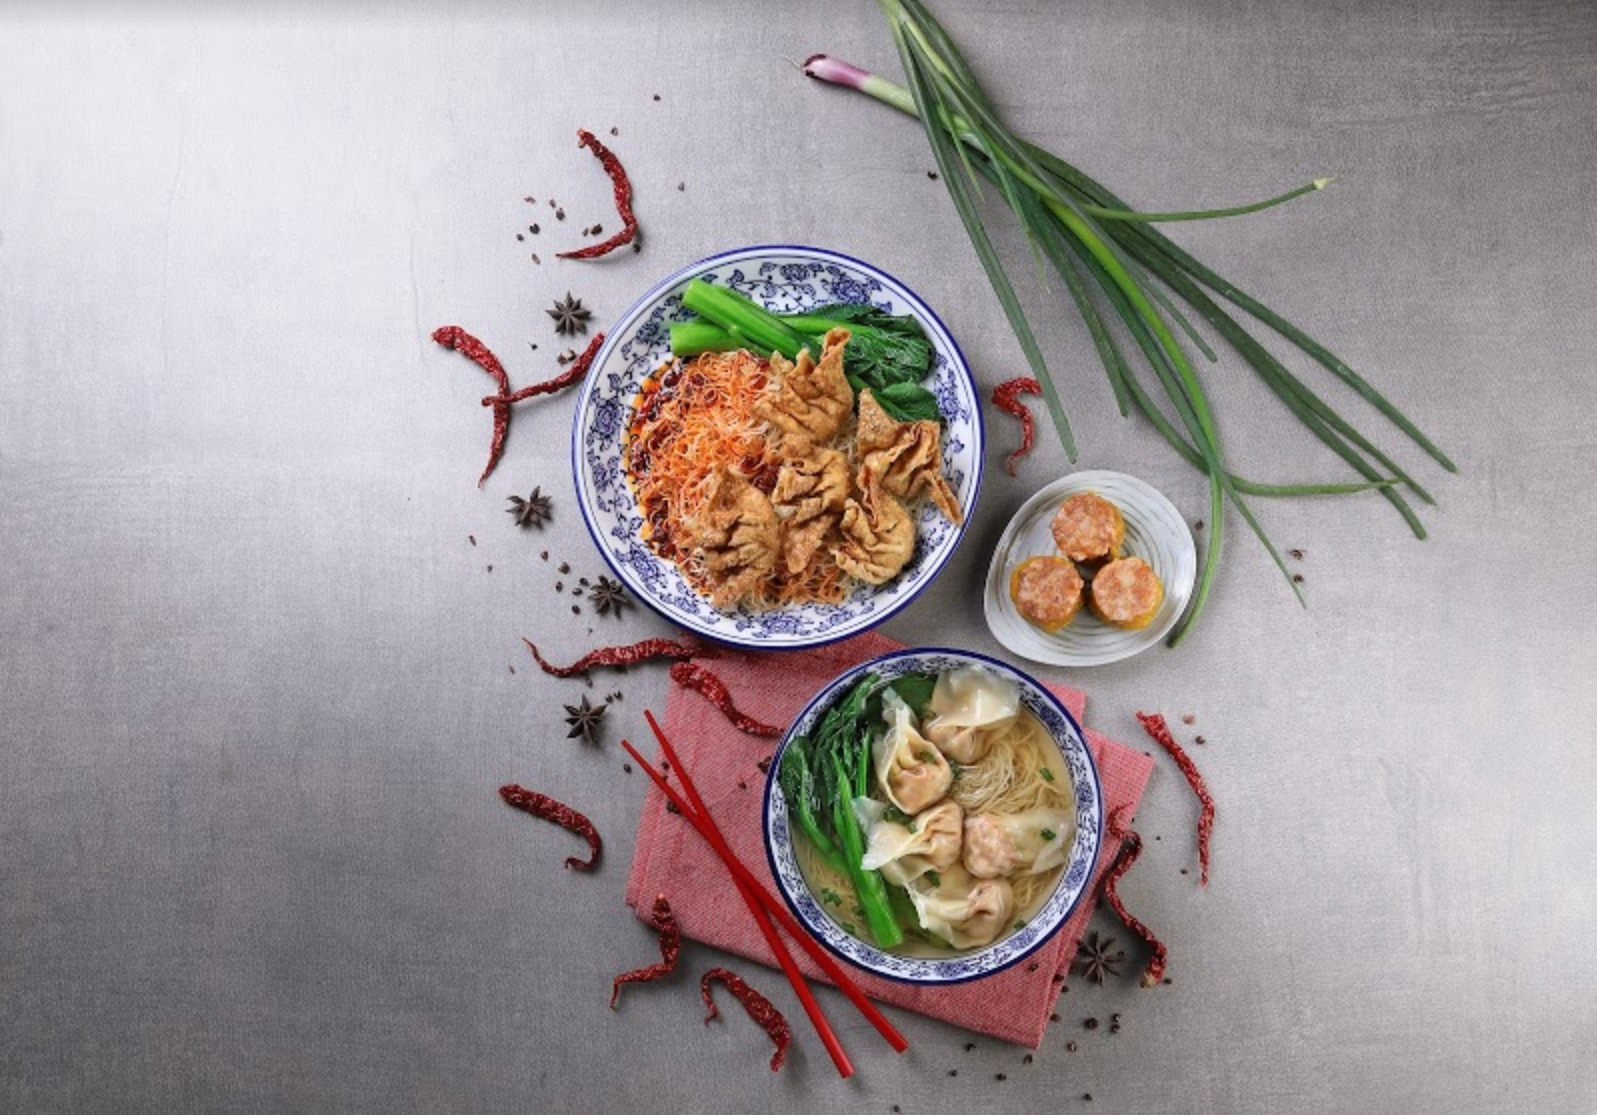 Mala Wanton Noodle will be available at Hong Kong Sheng Kee Dessert from 1 Oct 19 - 1